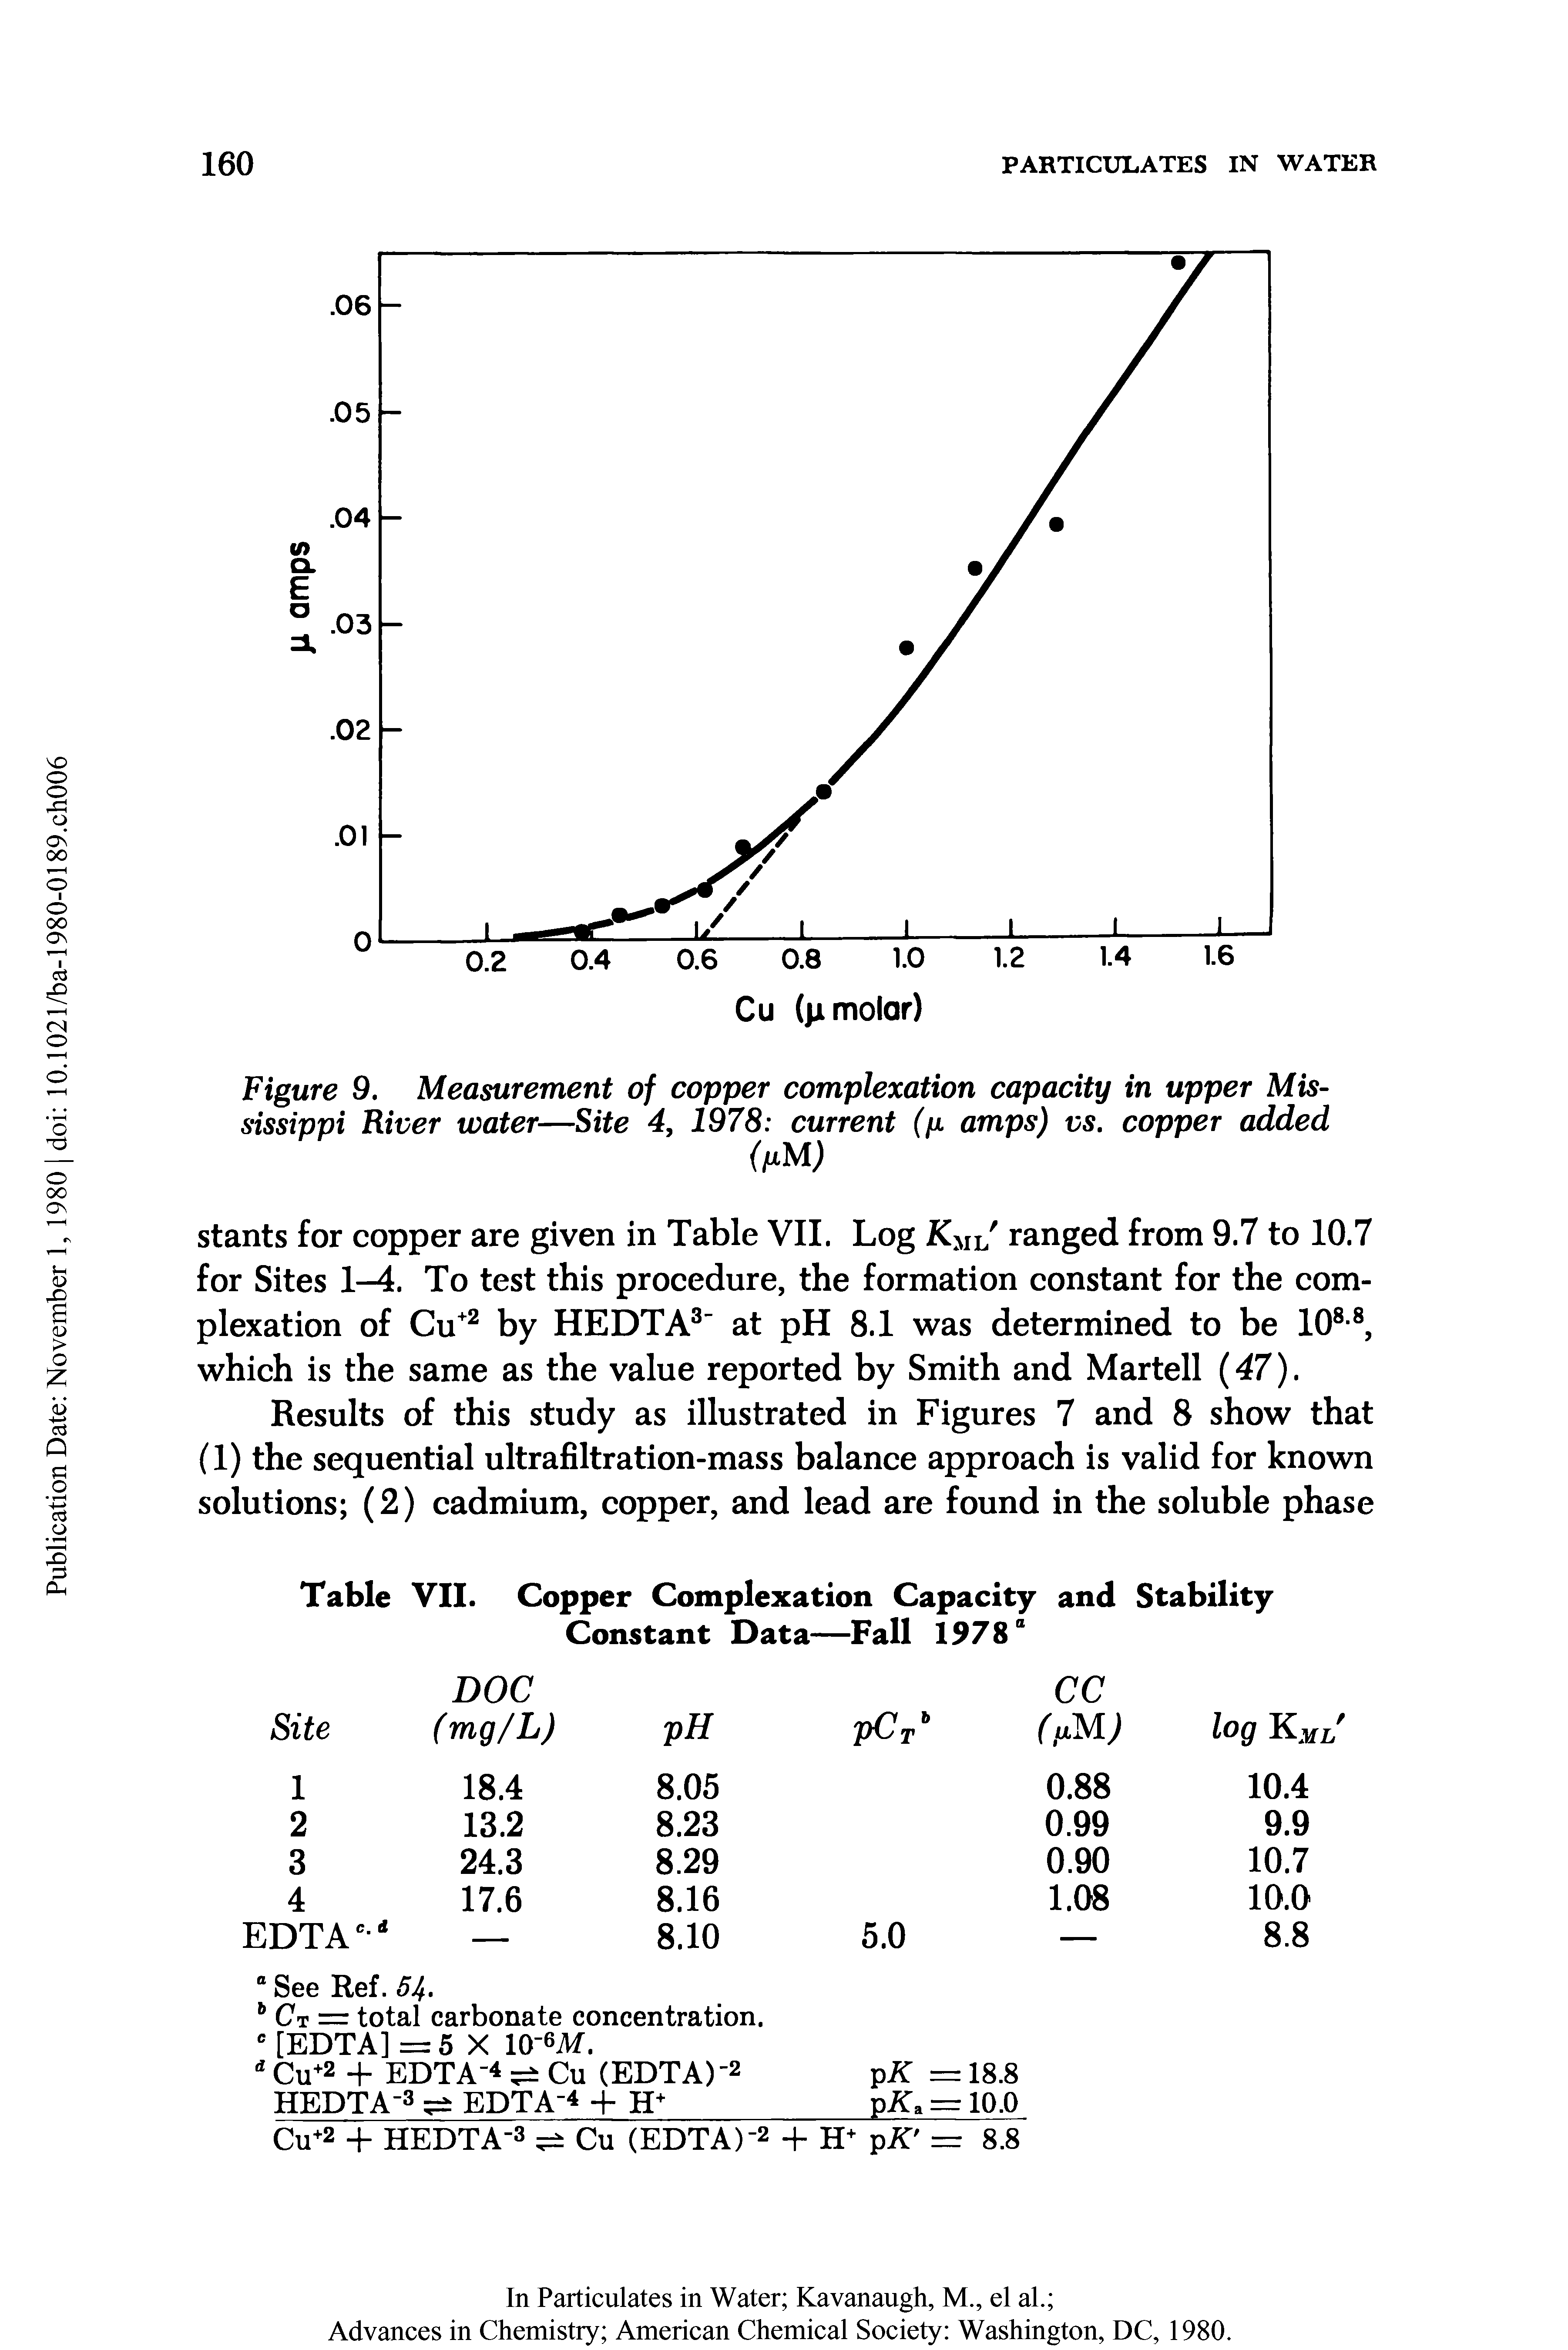 Table VII. Copper Complexation Capacity and Stability Constant Data—Fall 1978 ...